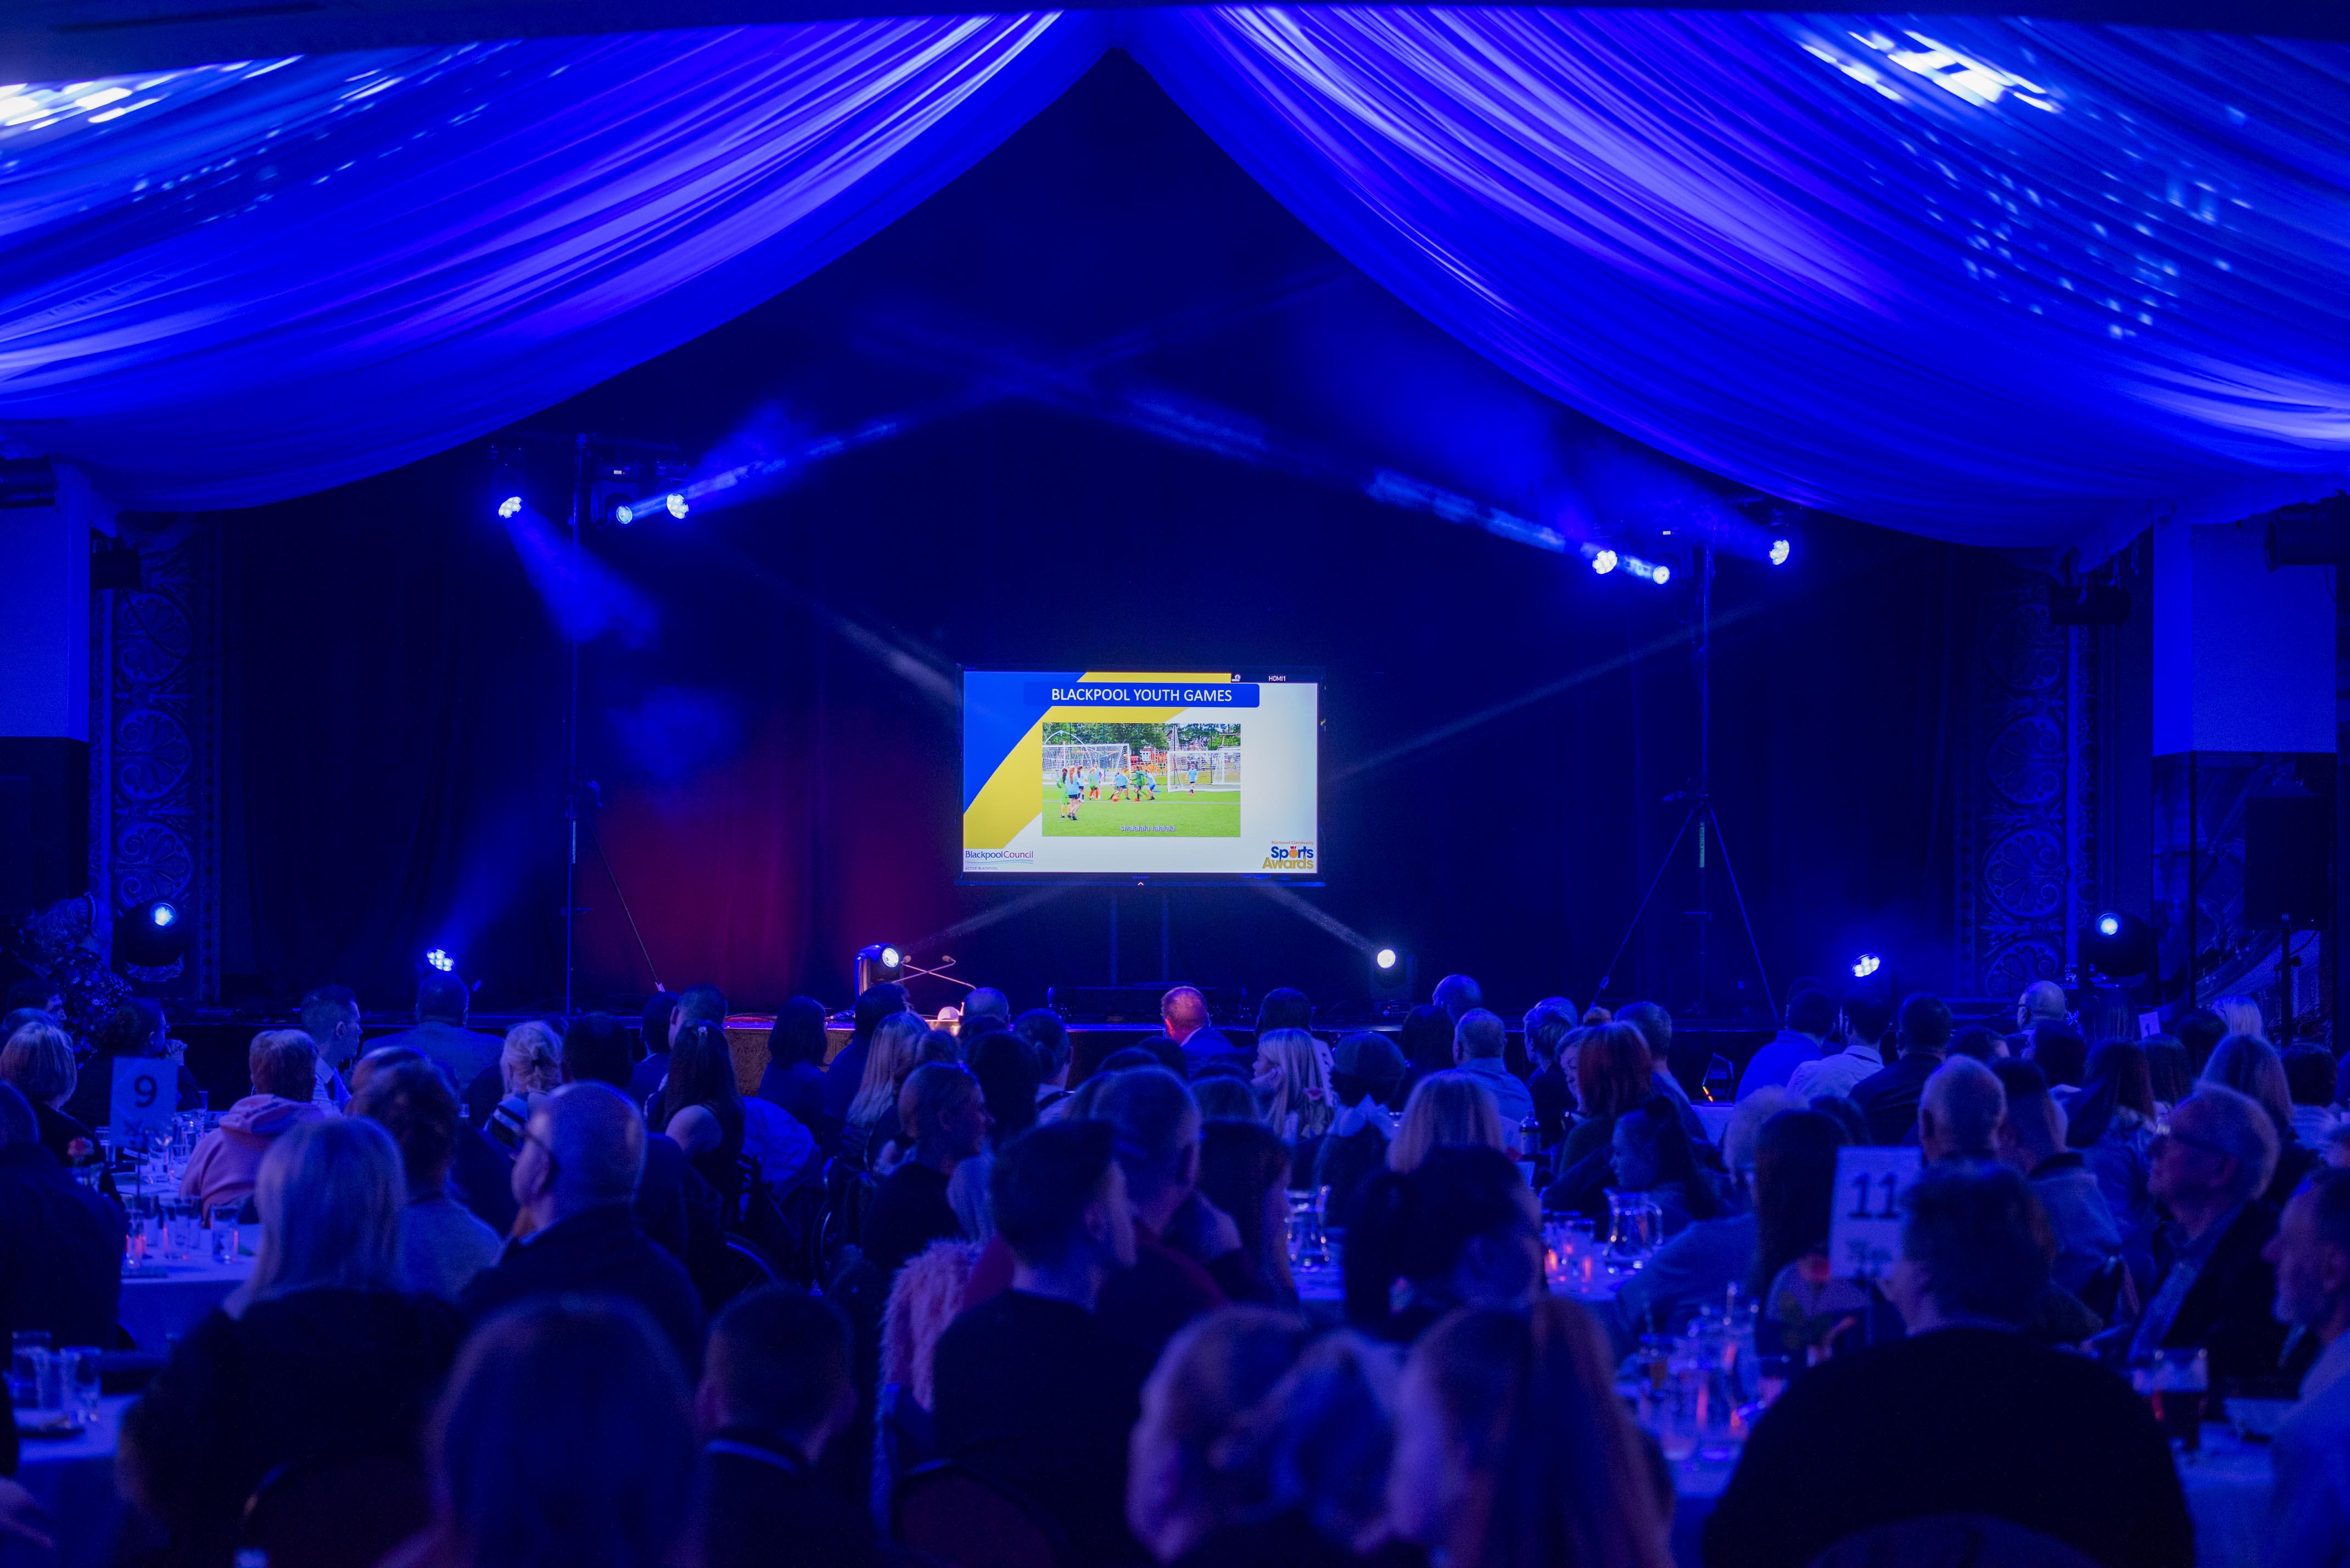 Overview image of the Sports Awards